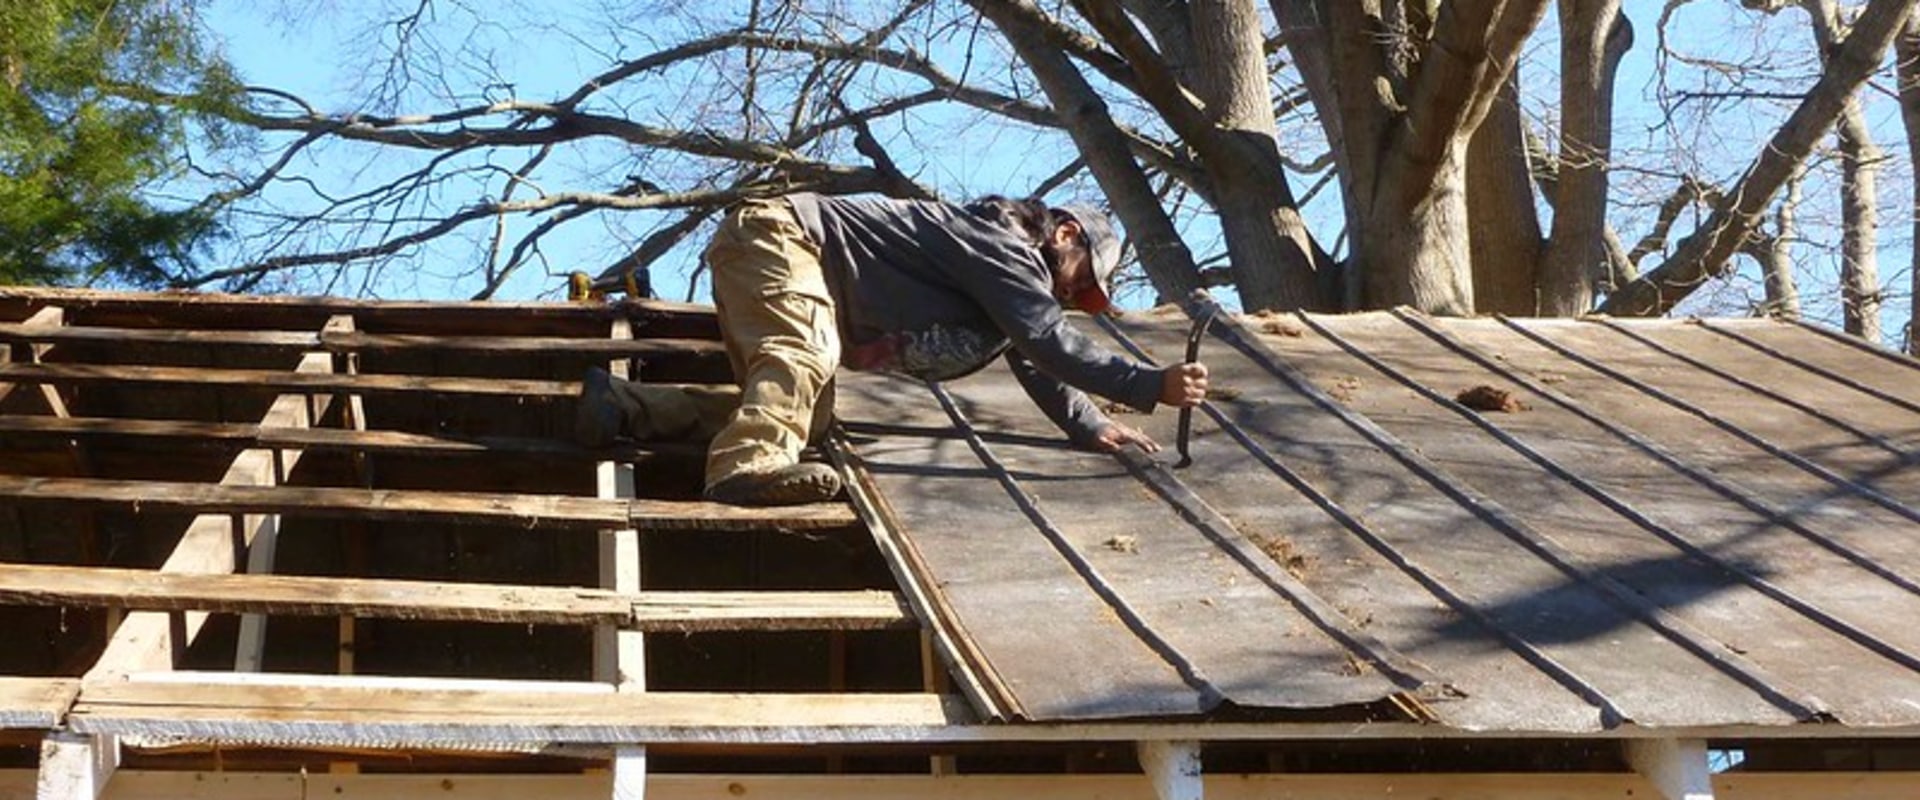 Short Sale Real Estate in Brewers Hill, Baltimore: Repairing A Damaged Roof After Purchase